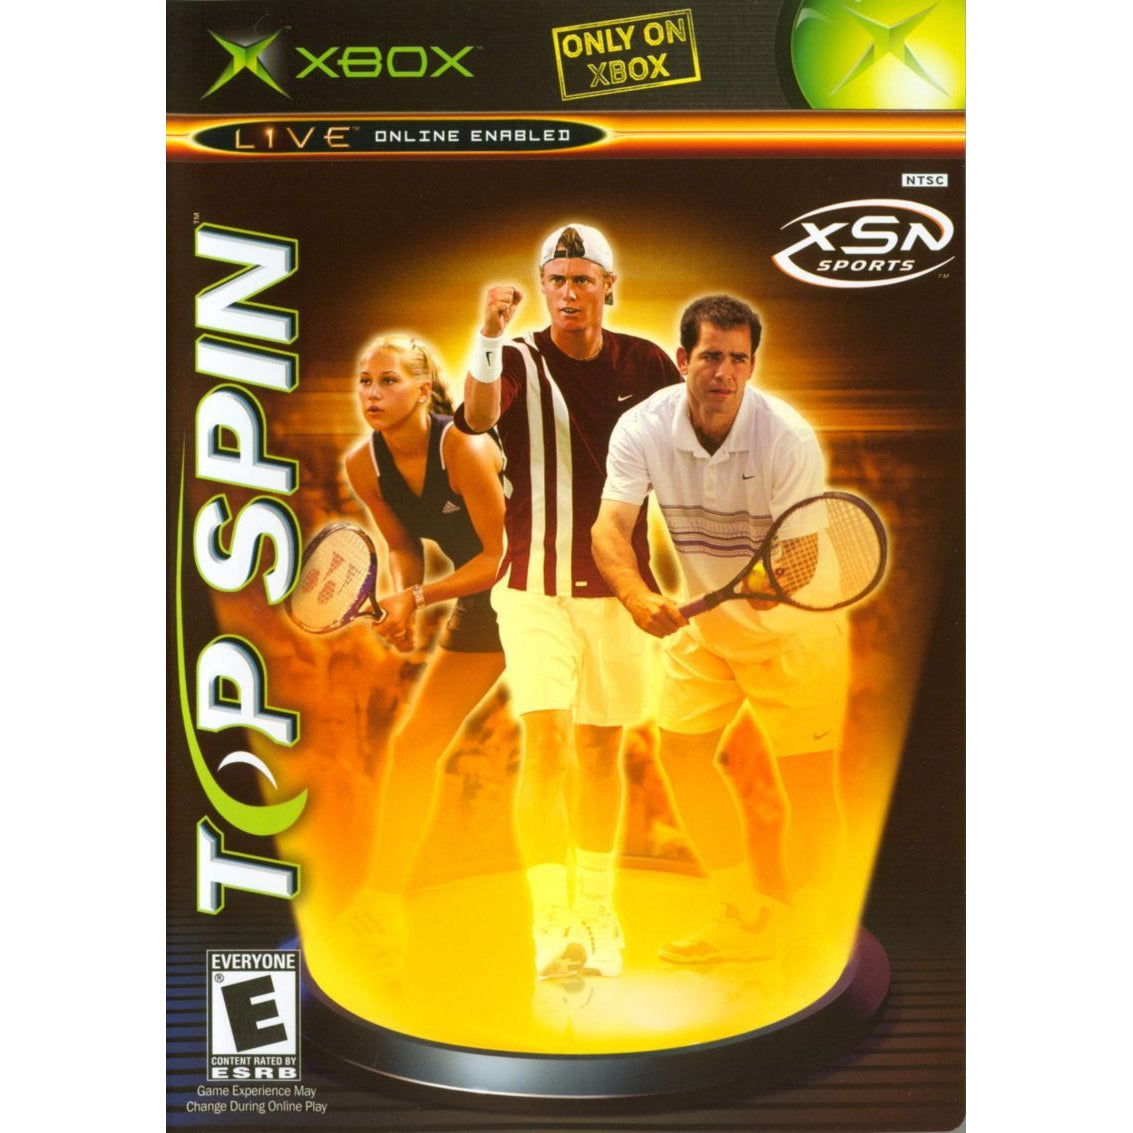 Top Spin - Microsoft Xbox Game Complete - YourGamingShop.com - Buy, Sell, Trade Video Games Online. 120 Day Warranty. Satisfaction Guaranteed.